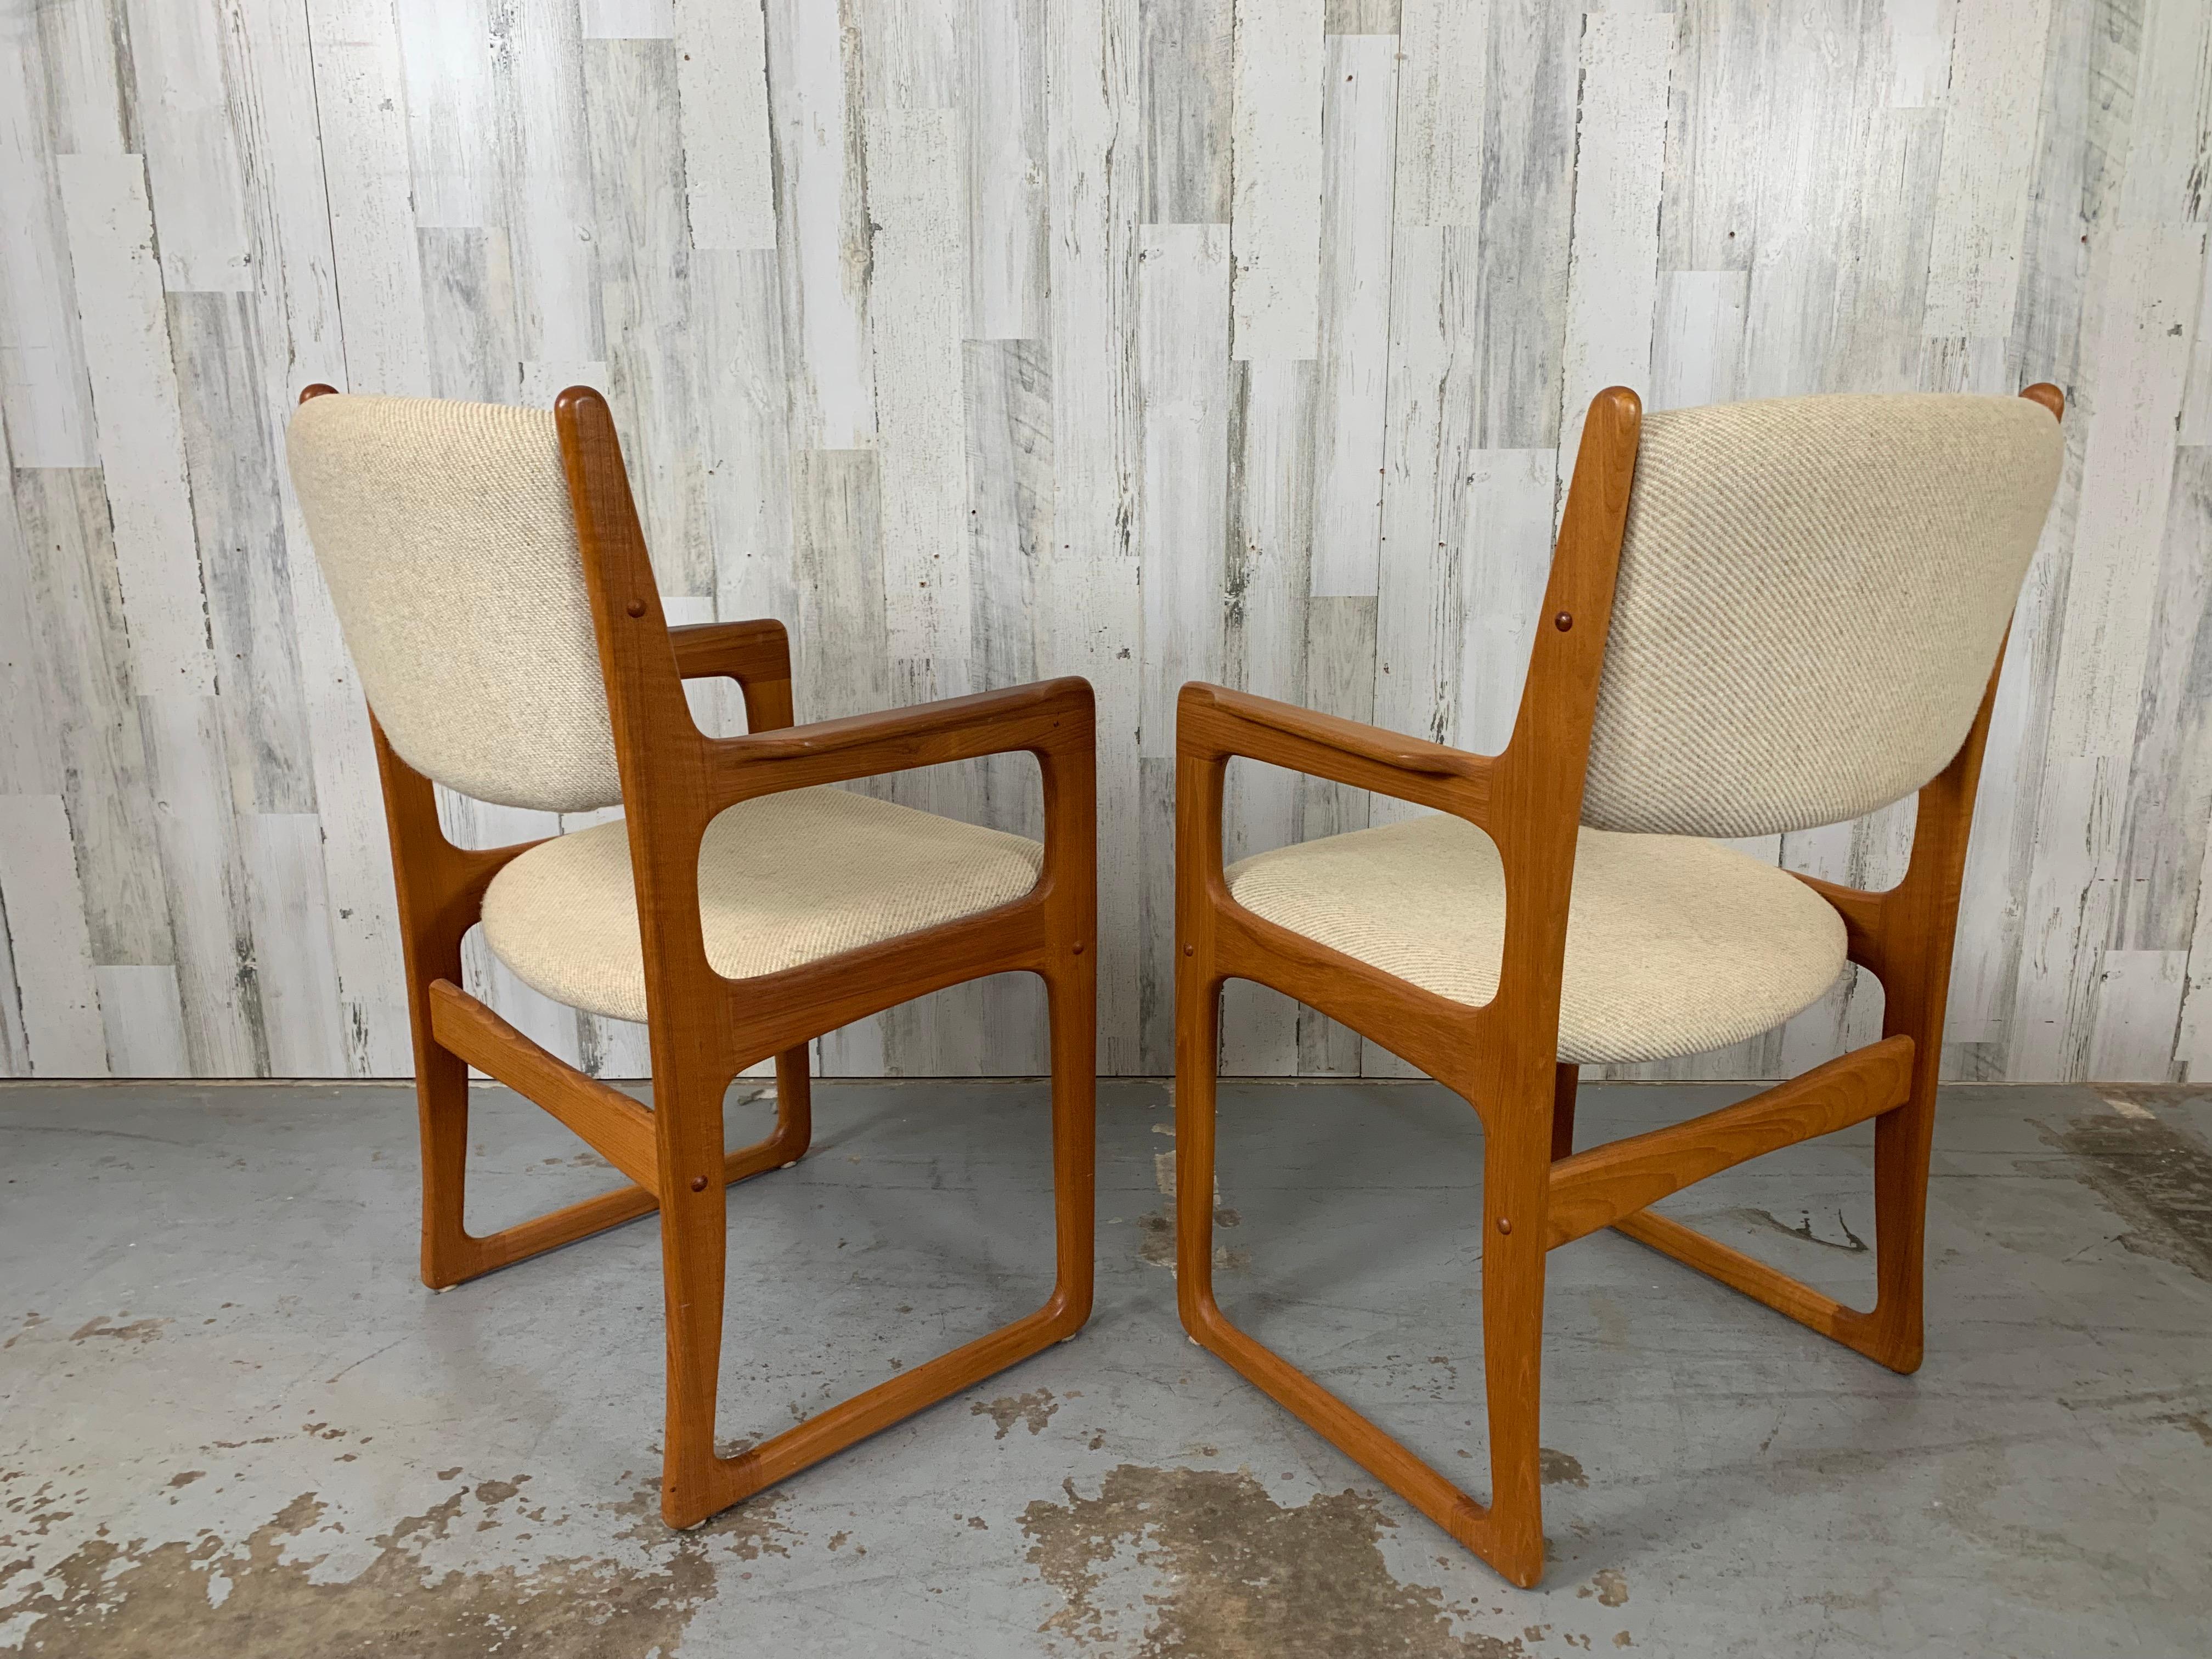 Pair of Danish Modern Style Armchairs In Good Condition For Sale In Denton, TX